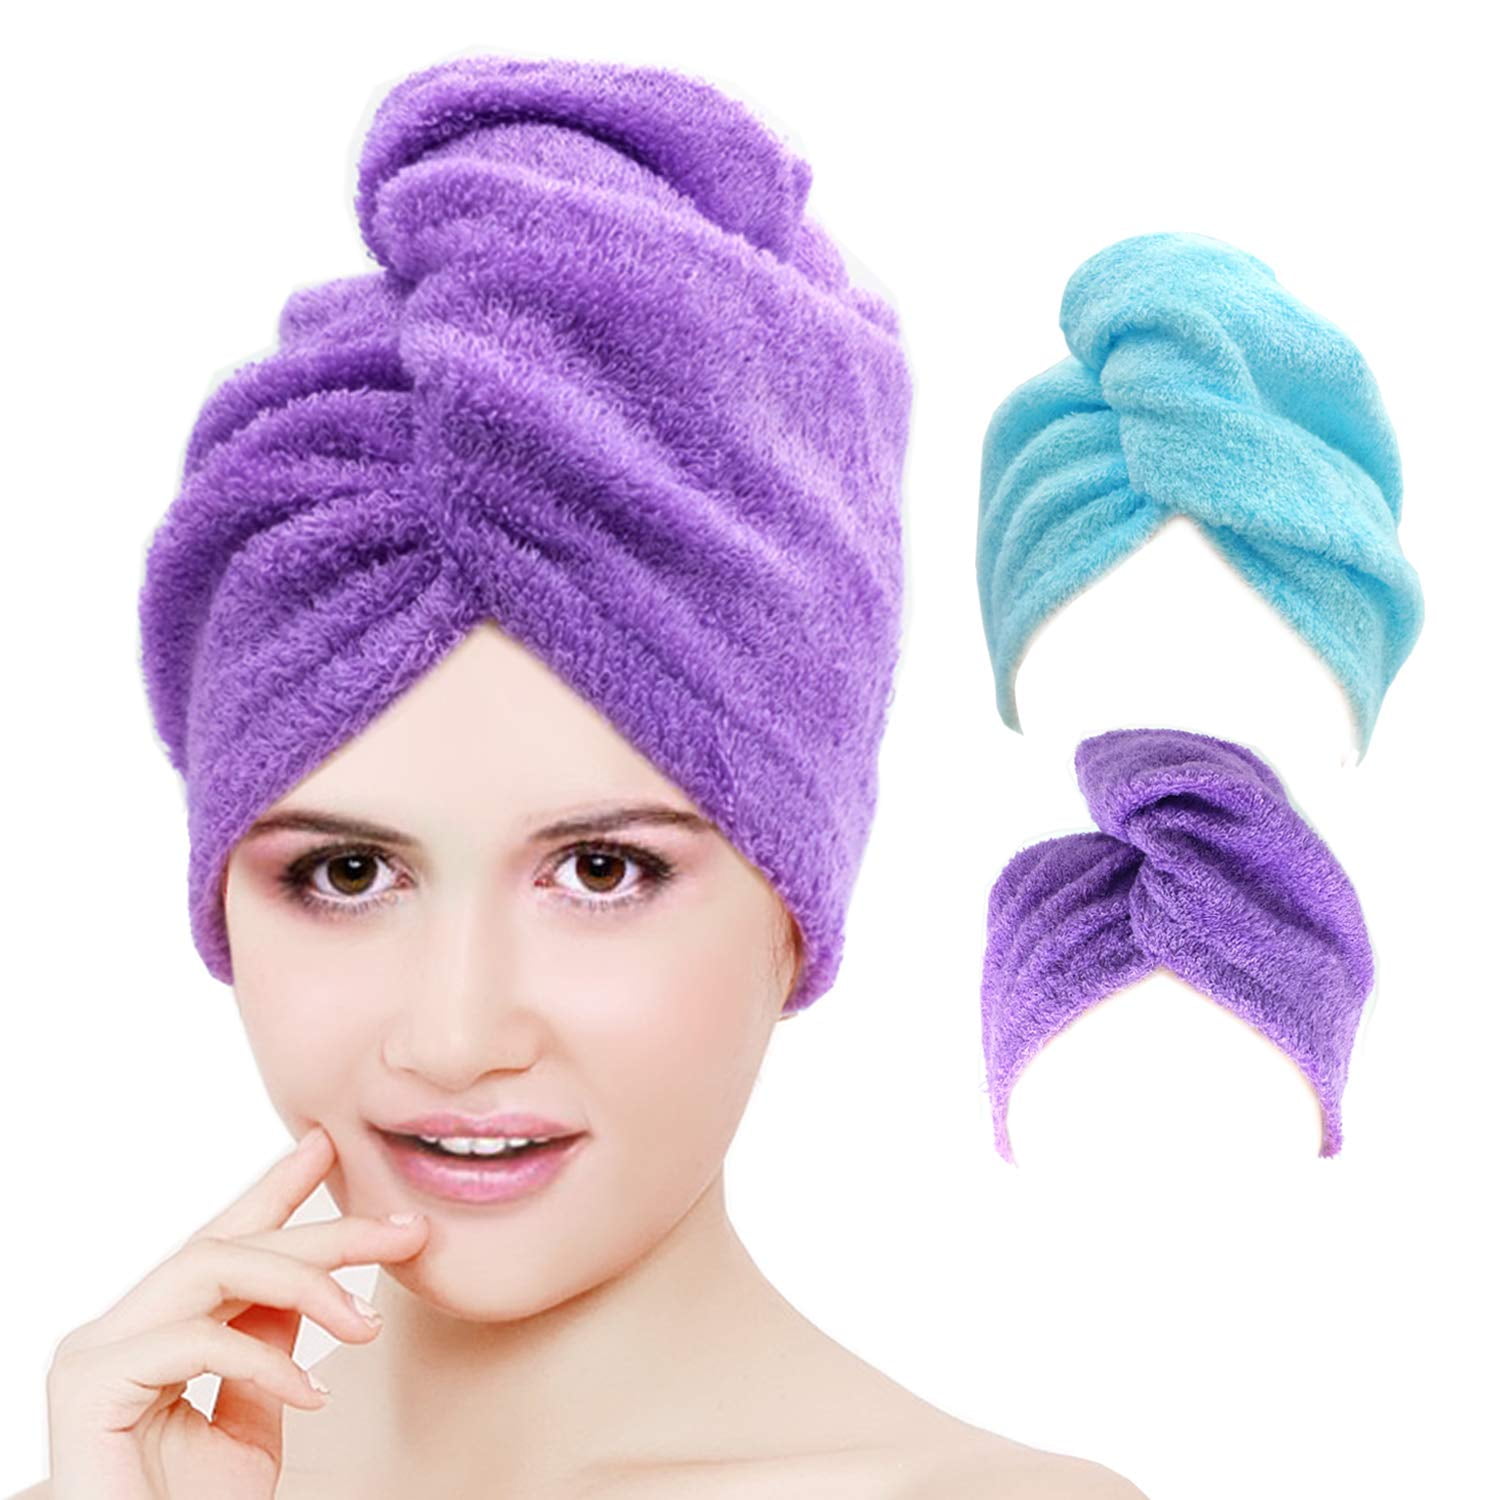 PURPLE Microfiber Quick Dry & Lightweight Hair Towel with Button for Secure Hold 